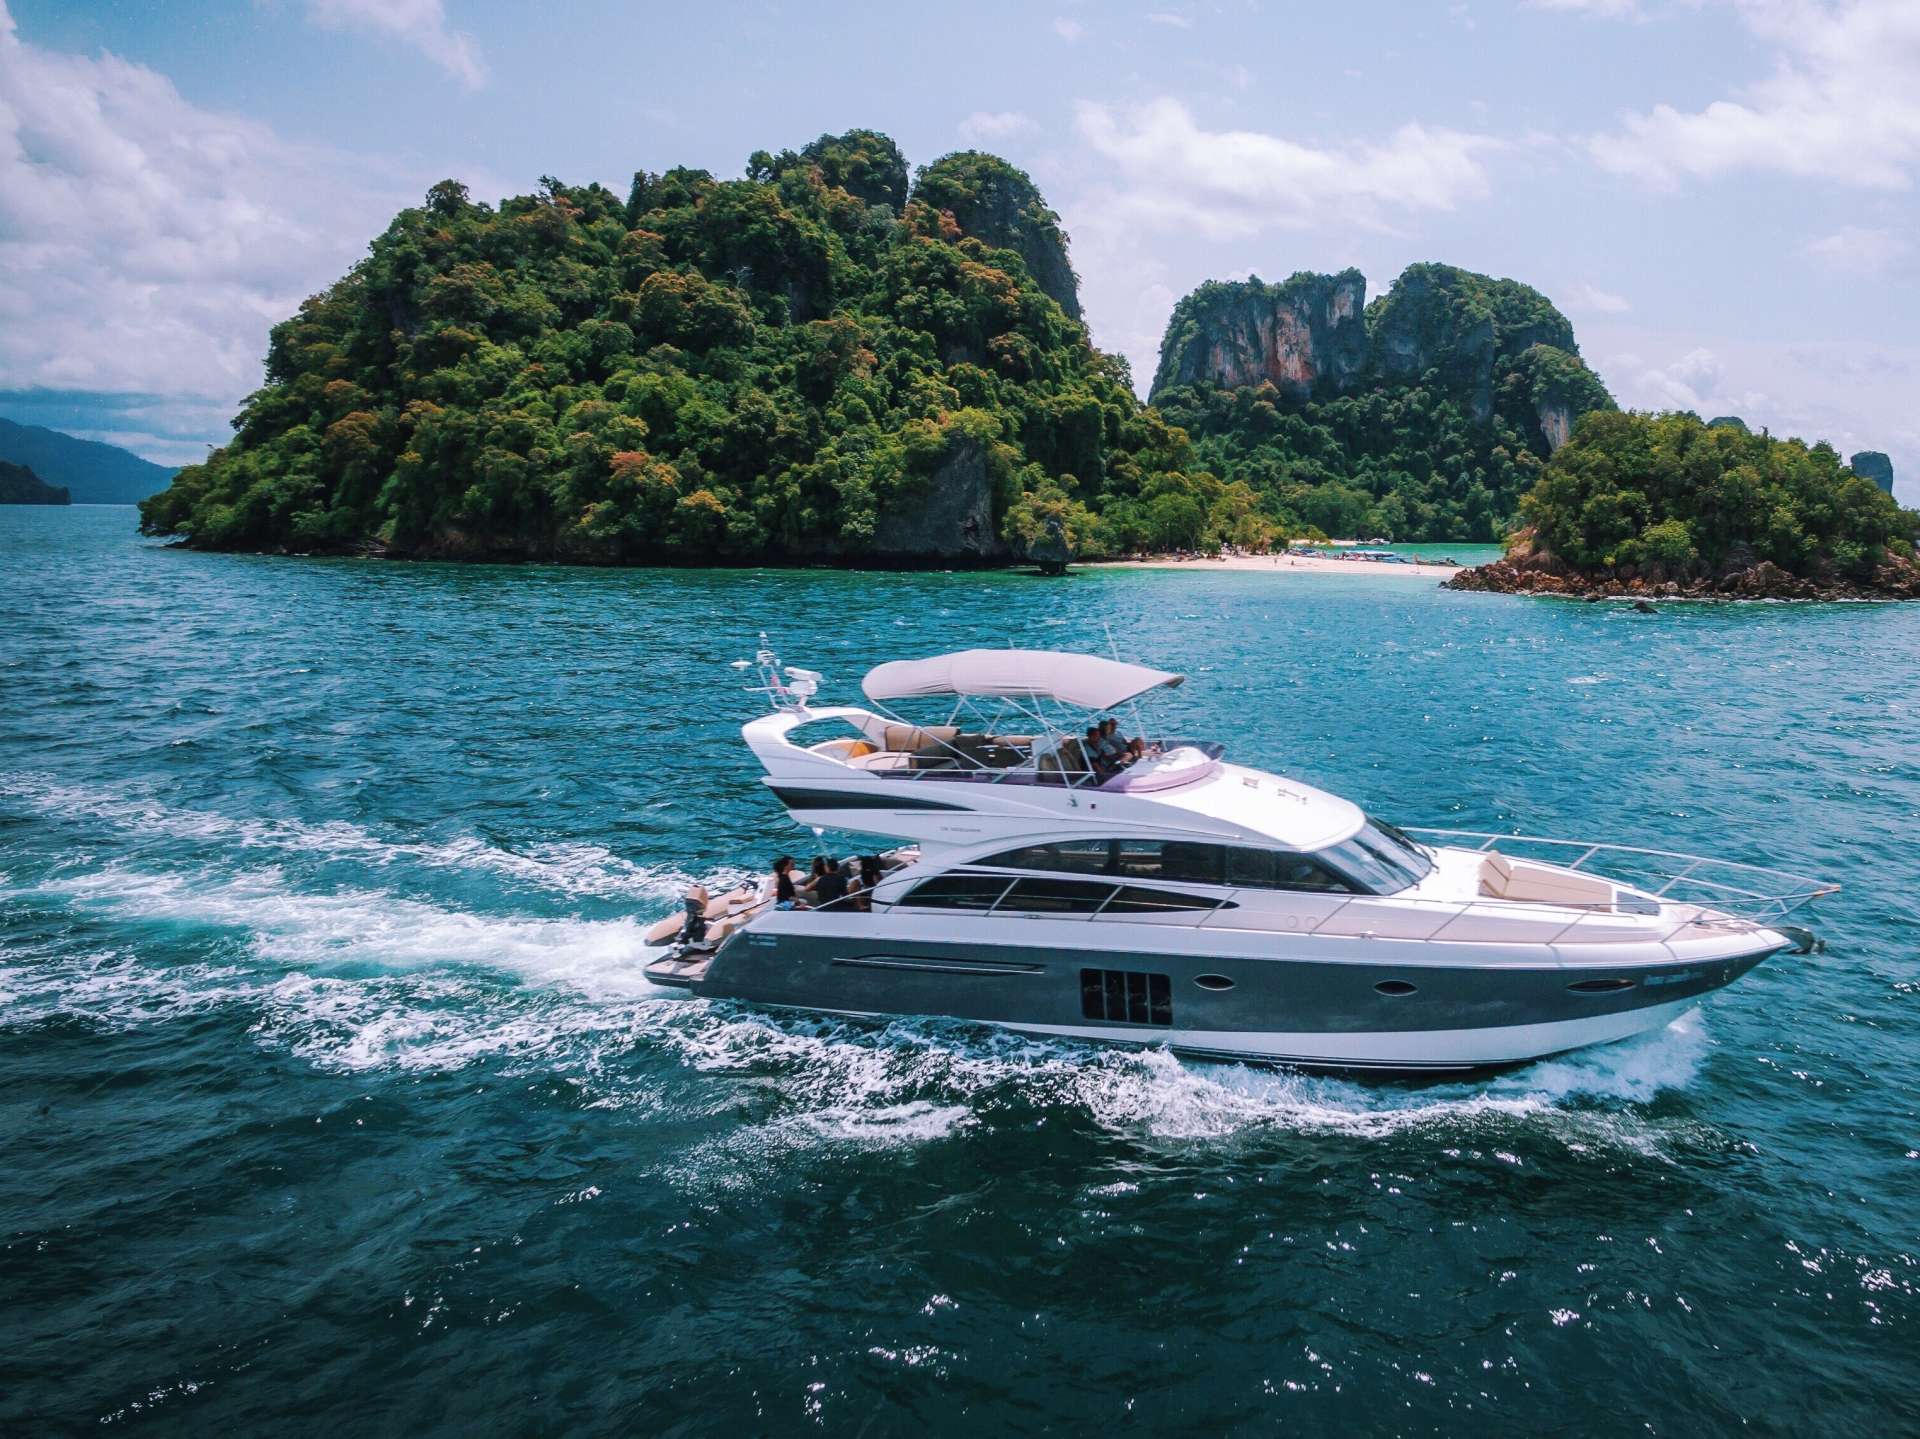 mayavee - Luxury yacht charter Thailand & Boat hire in SE Asia 1